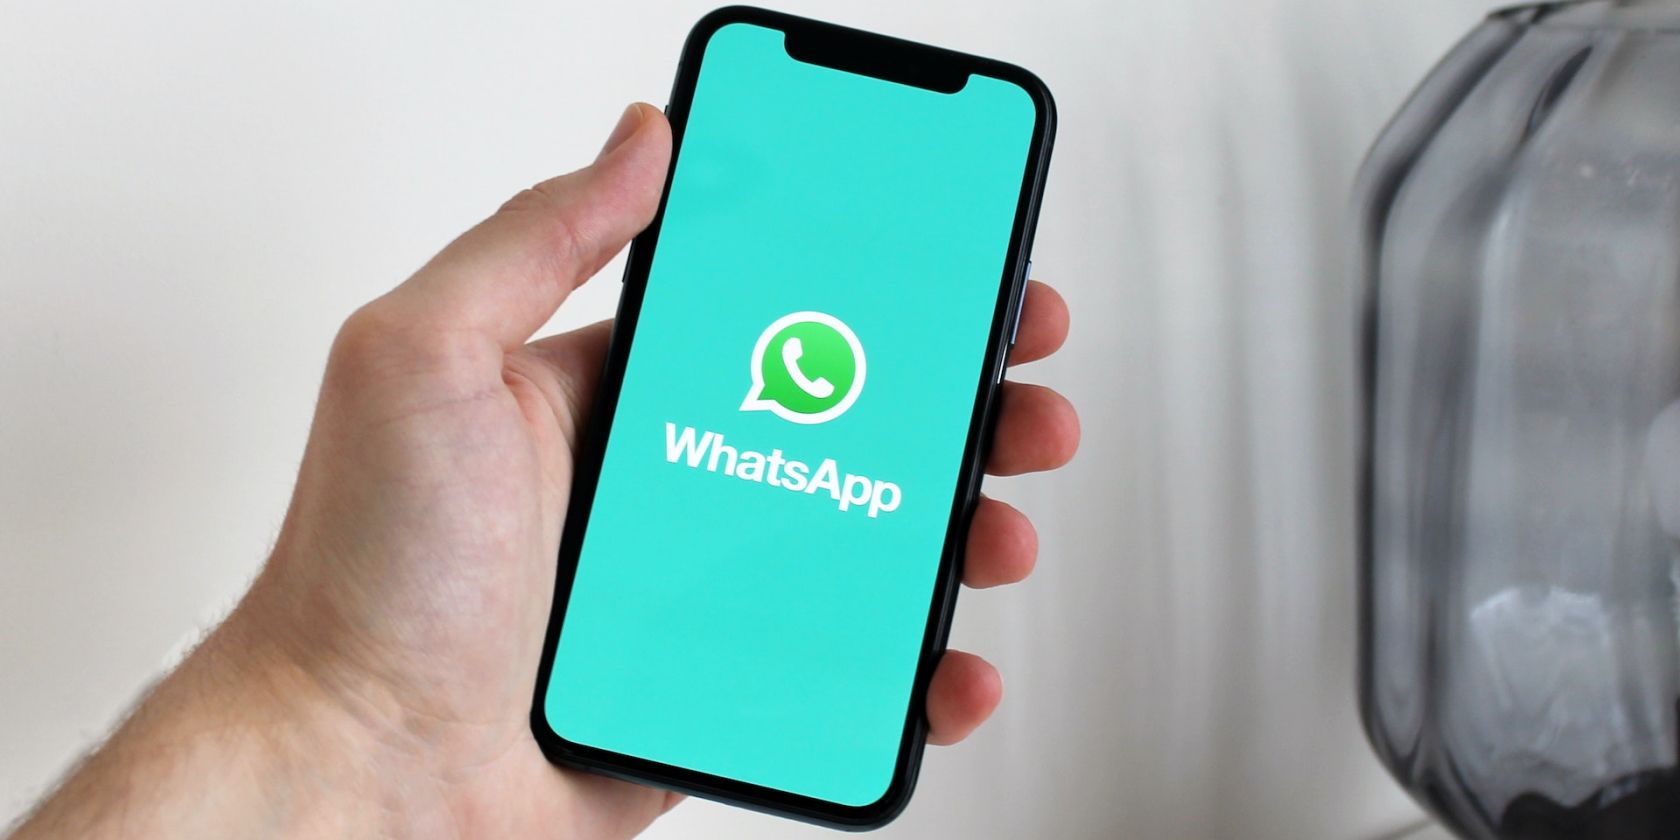 How can I use two WhatsApp accounts on my iPhone?